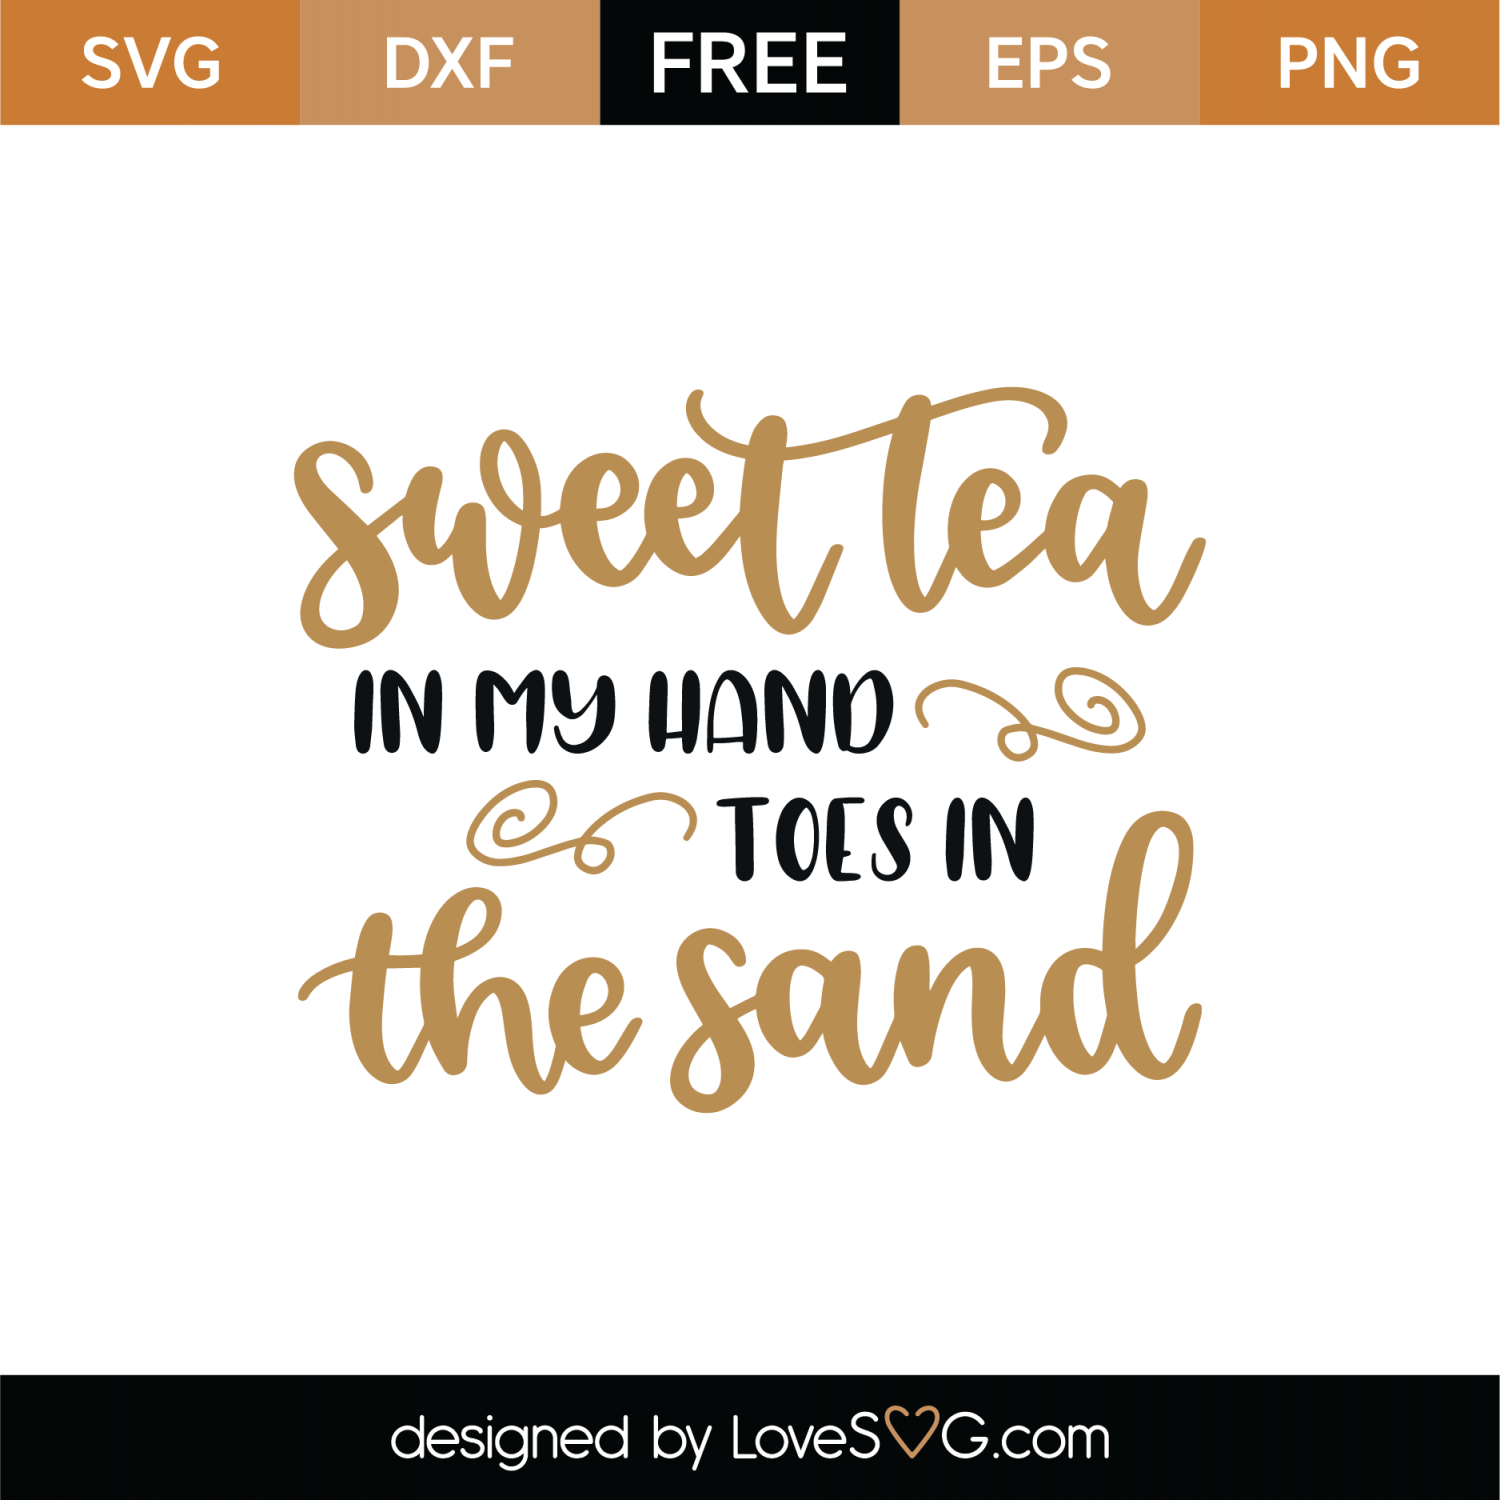 Download Free Sweet Tea In My Hand Toes In The Sand SVG Cut File ...